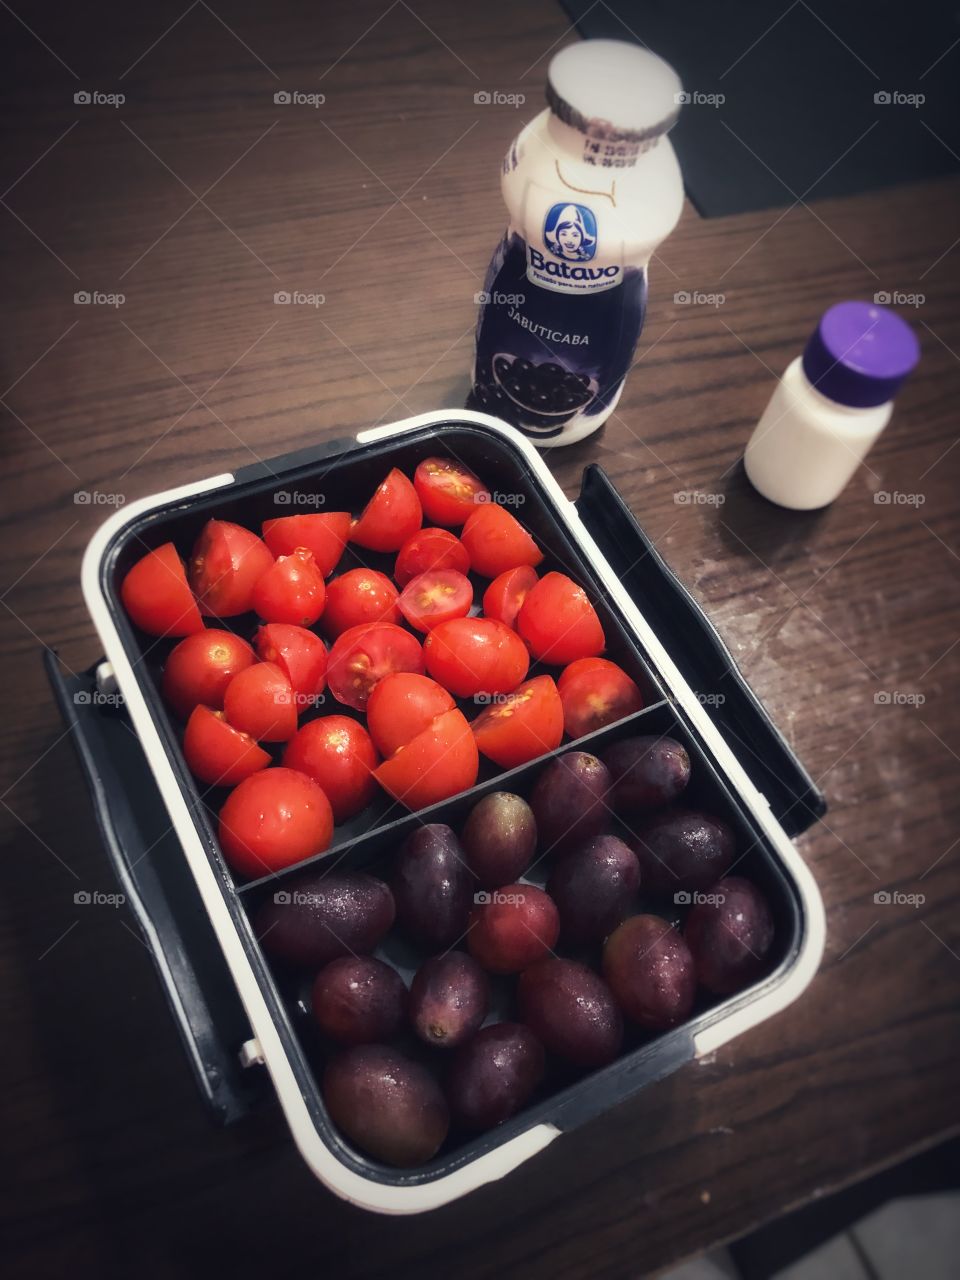 Health food for school snack time... Grapes, Cherry tomatoes, and jaboticaba yogurt. The perfect snack to make my son happy during his classes break in the morning.